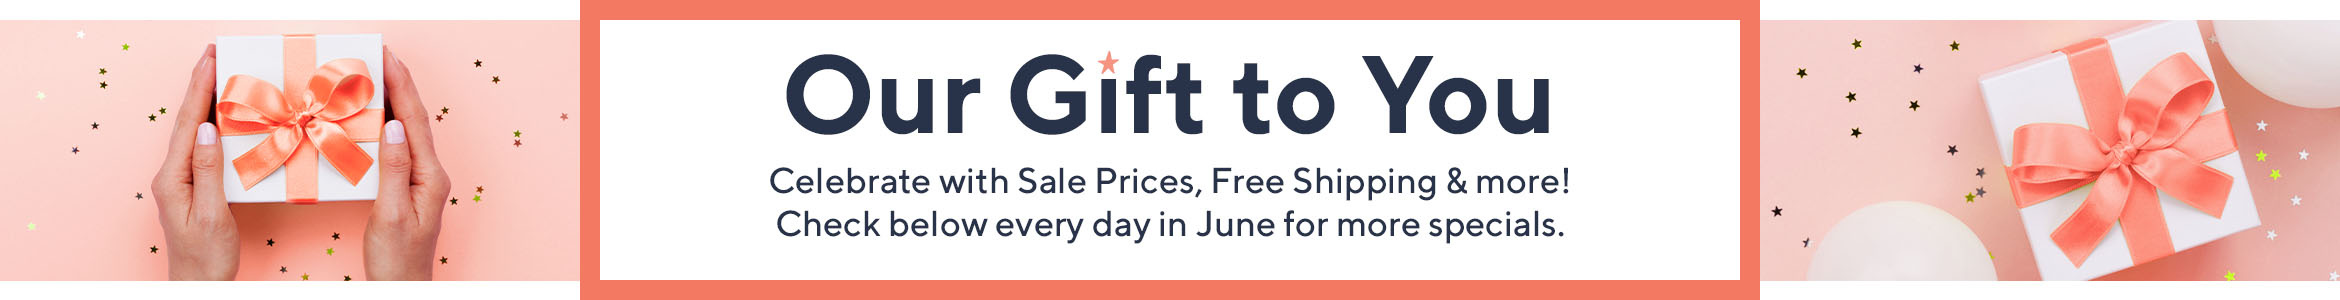 Our Gift to You Celebrate with Sale Prices, Free Shipping & more! Check below every day in June for more specials. 